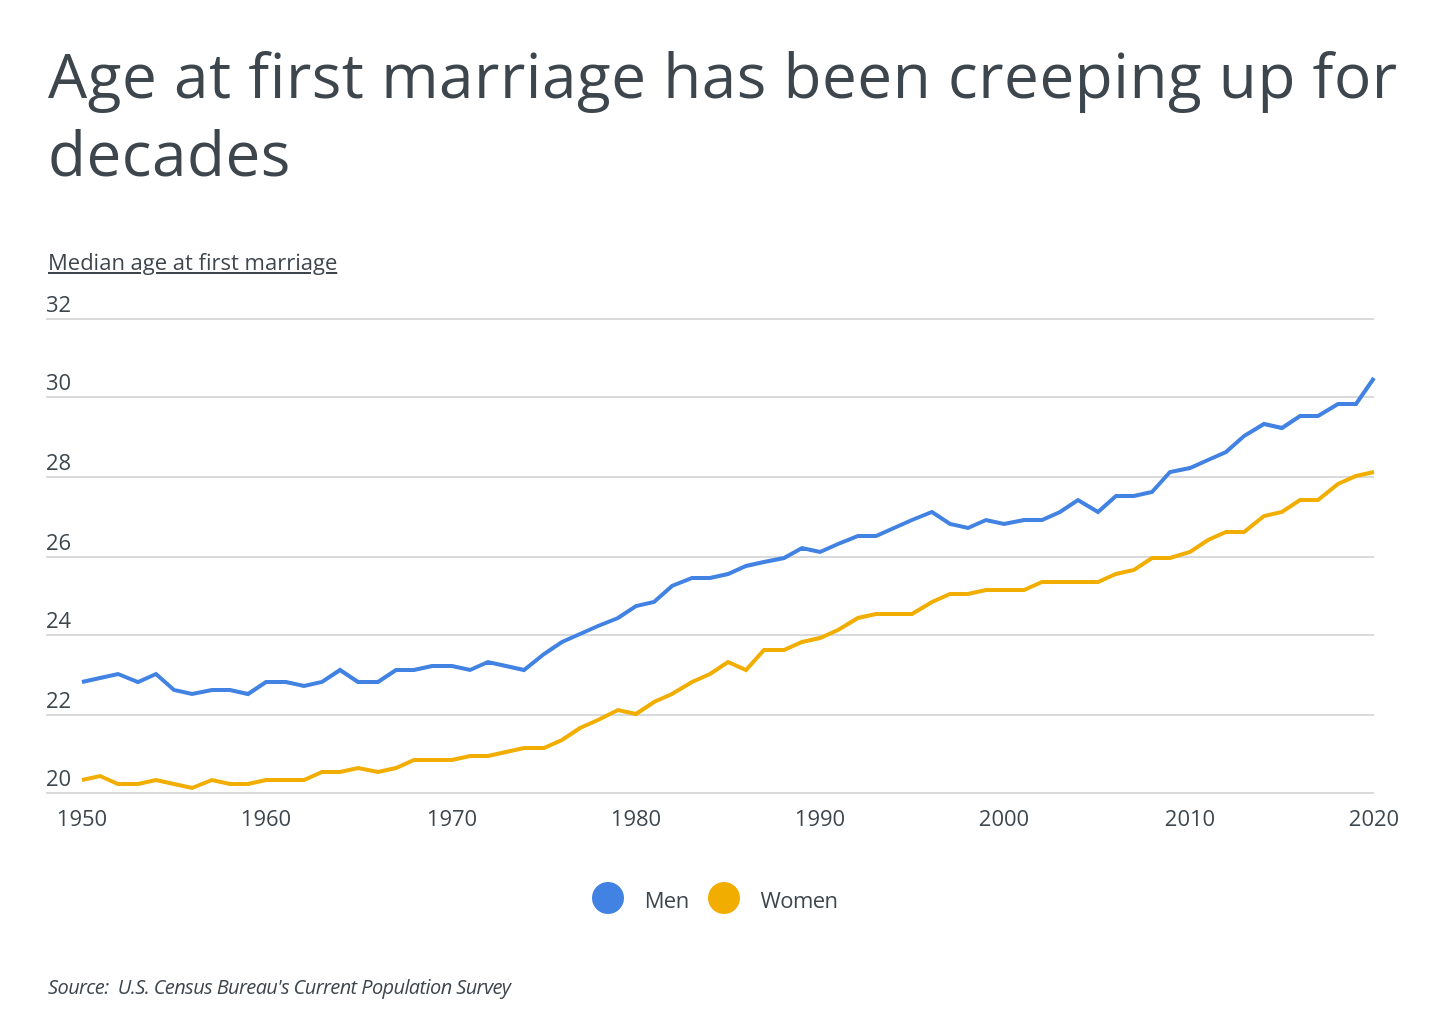 Age at first marriage has been creeping up for decades